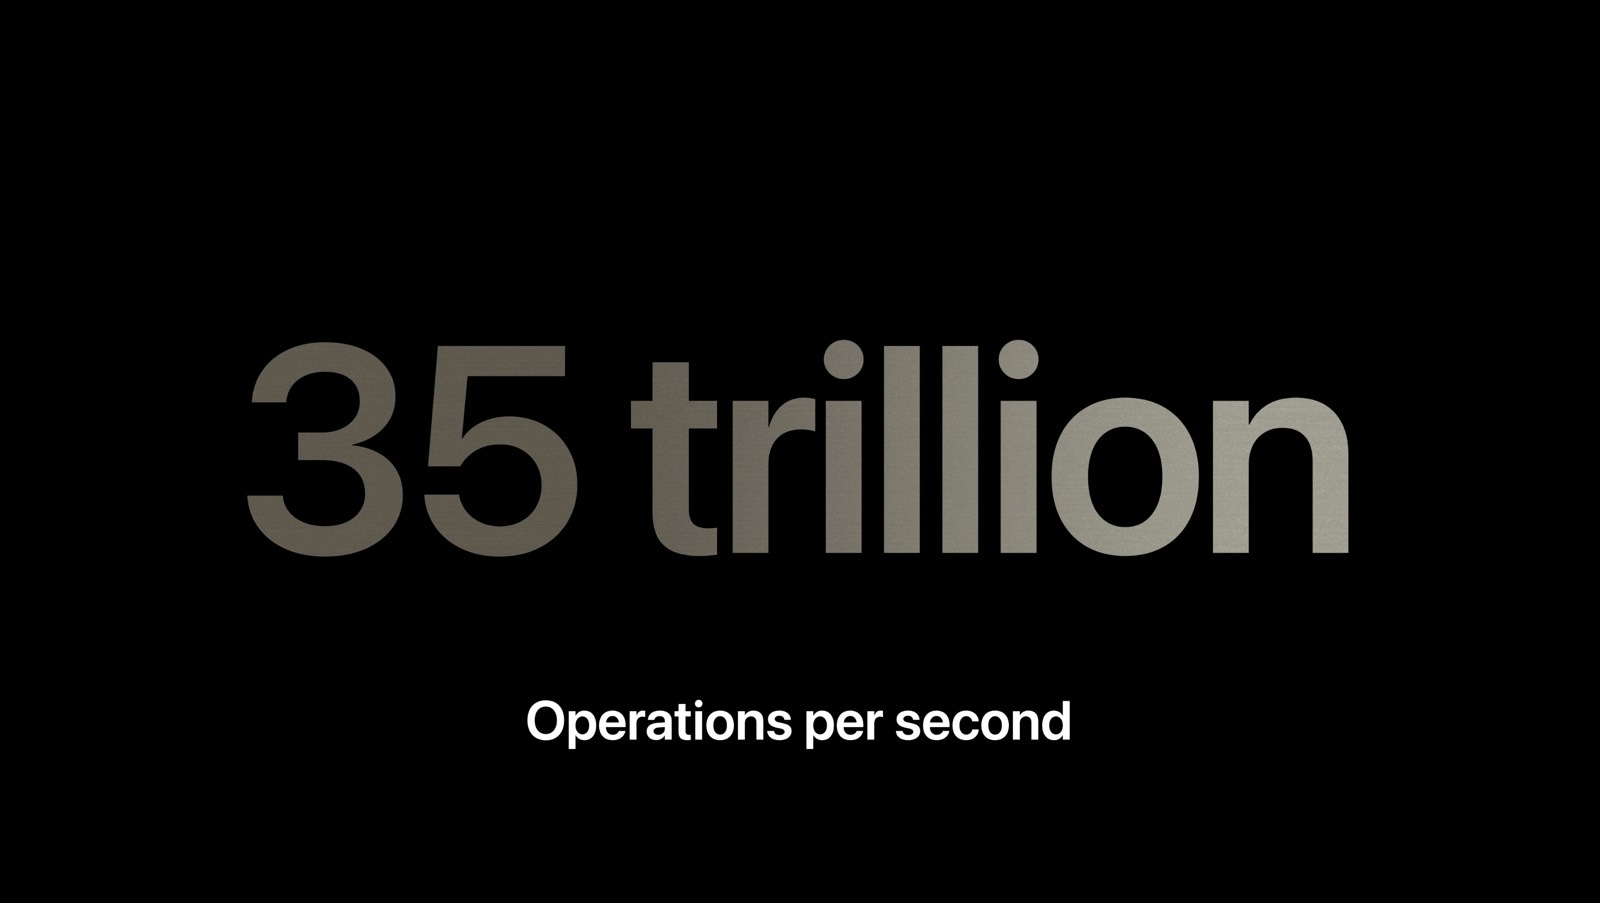 The Neural Engine in the iPhone 15 Pro's A17 Pro chip tops at 35 trillion operations per second.